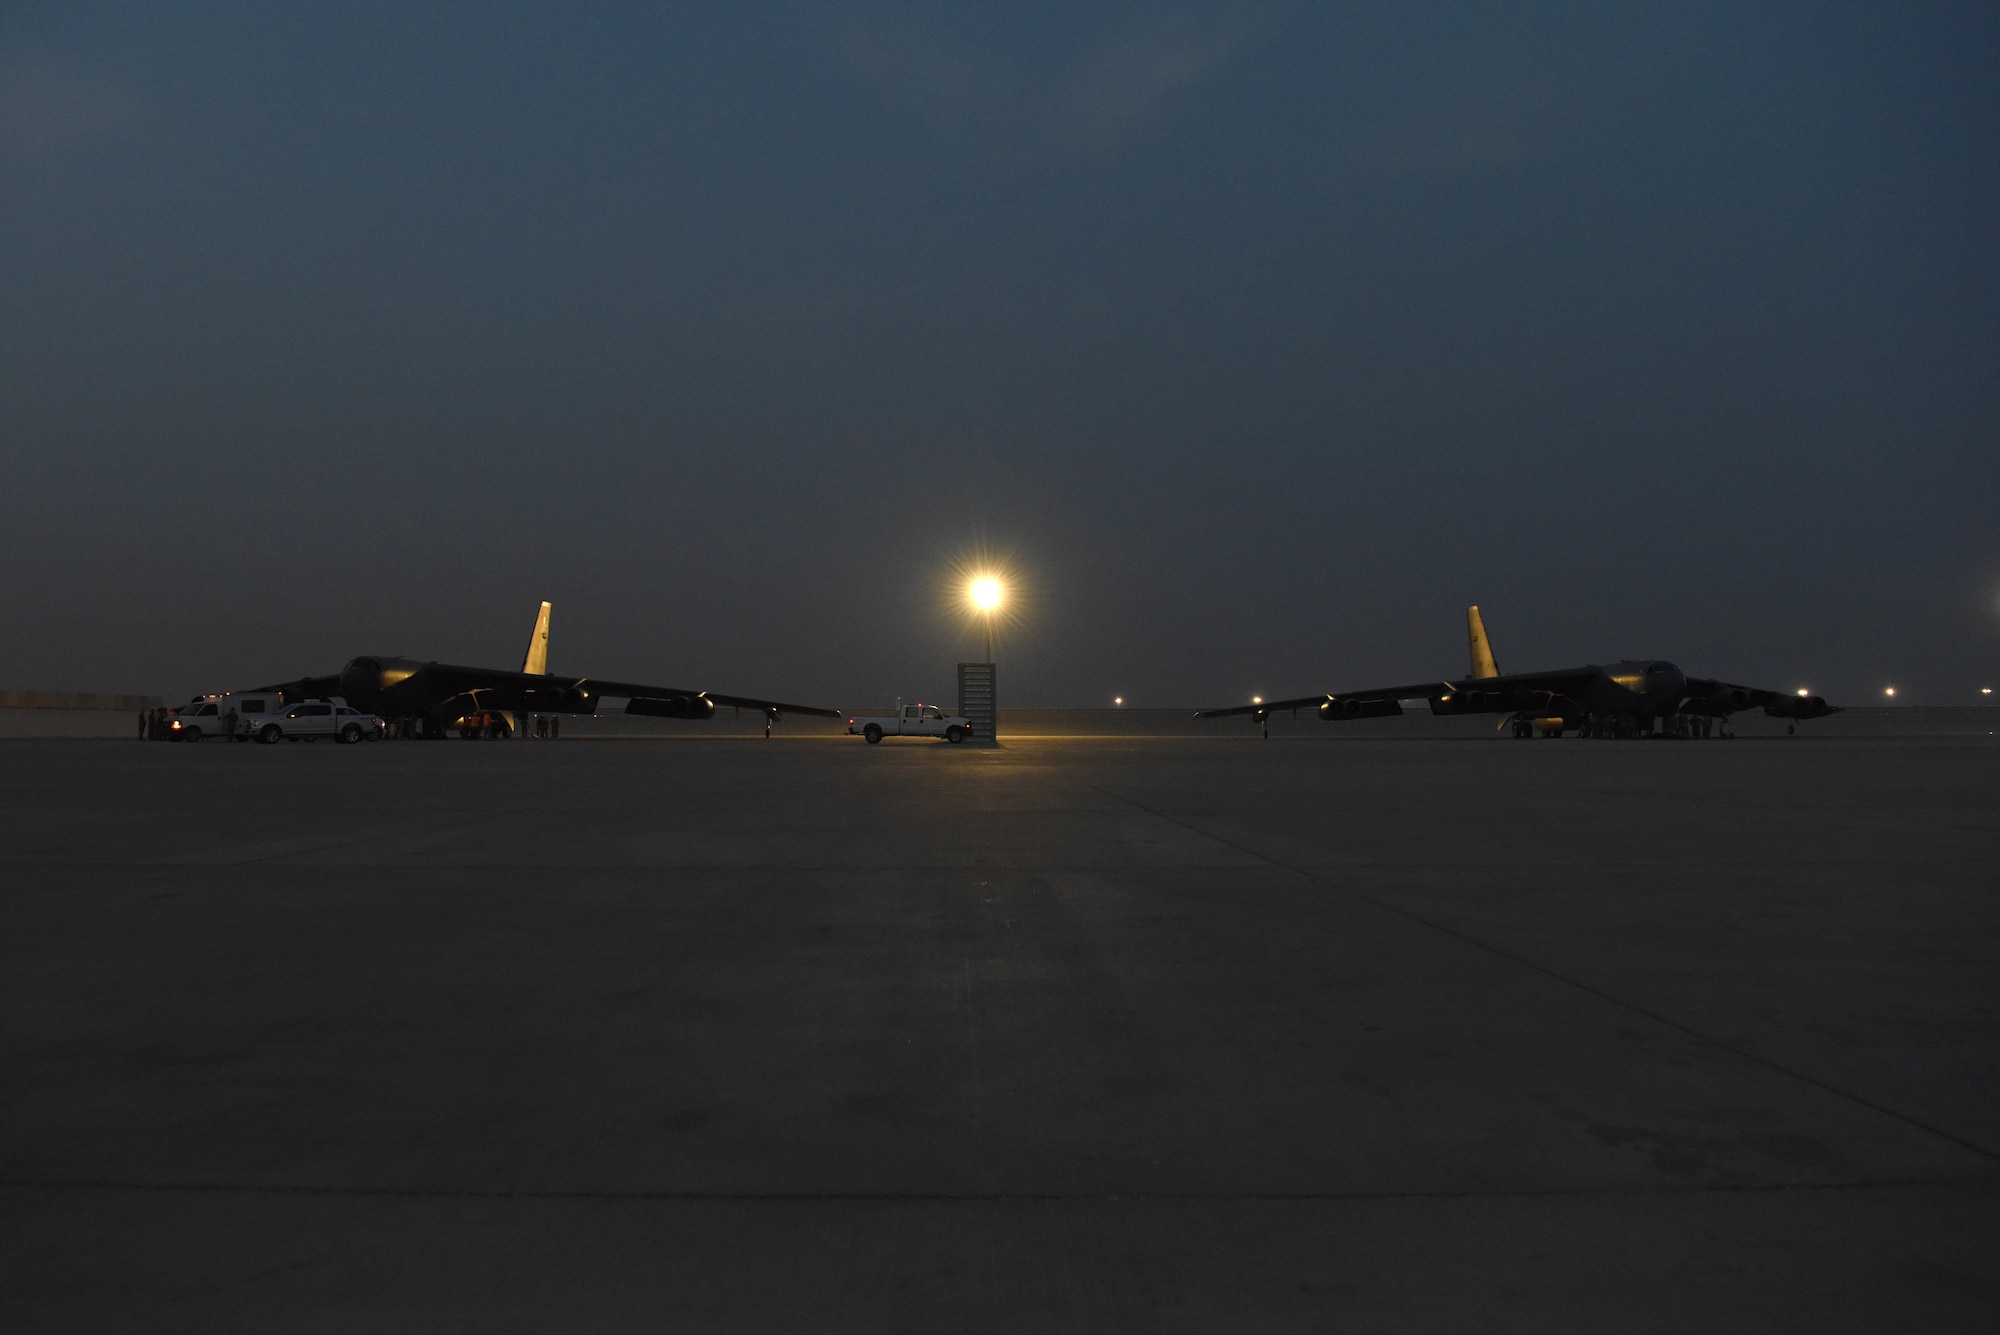 A photo of two B-52 bombers